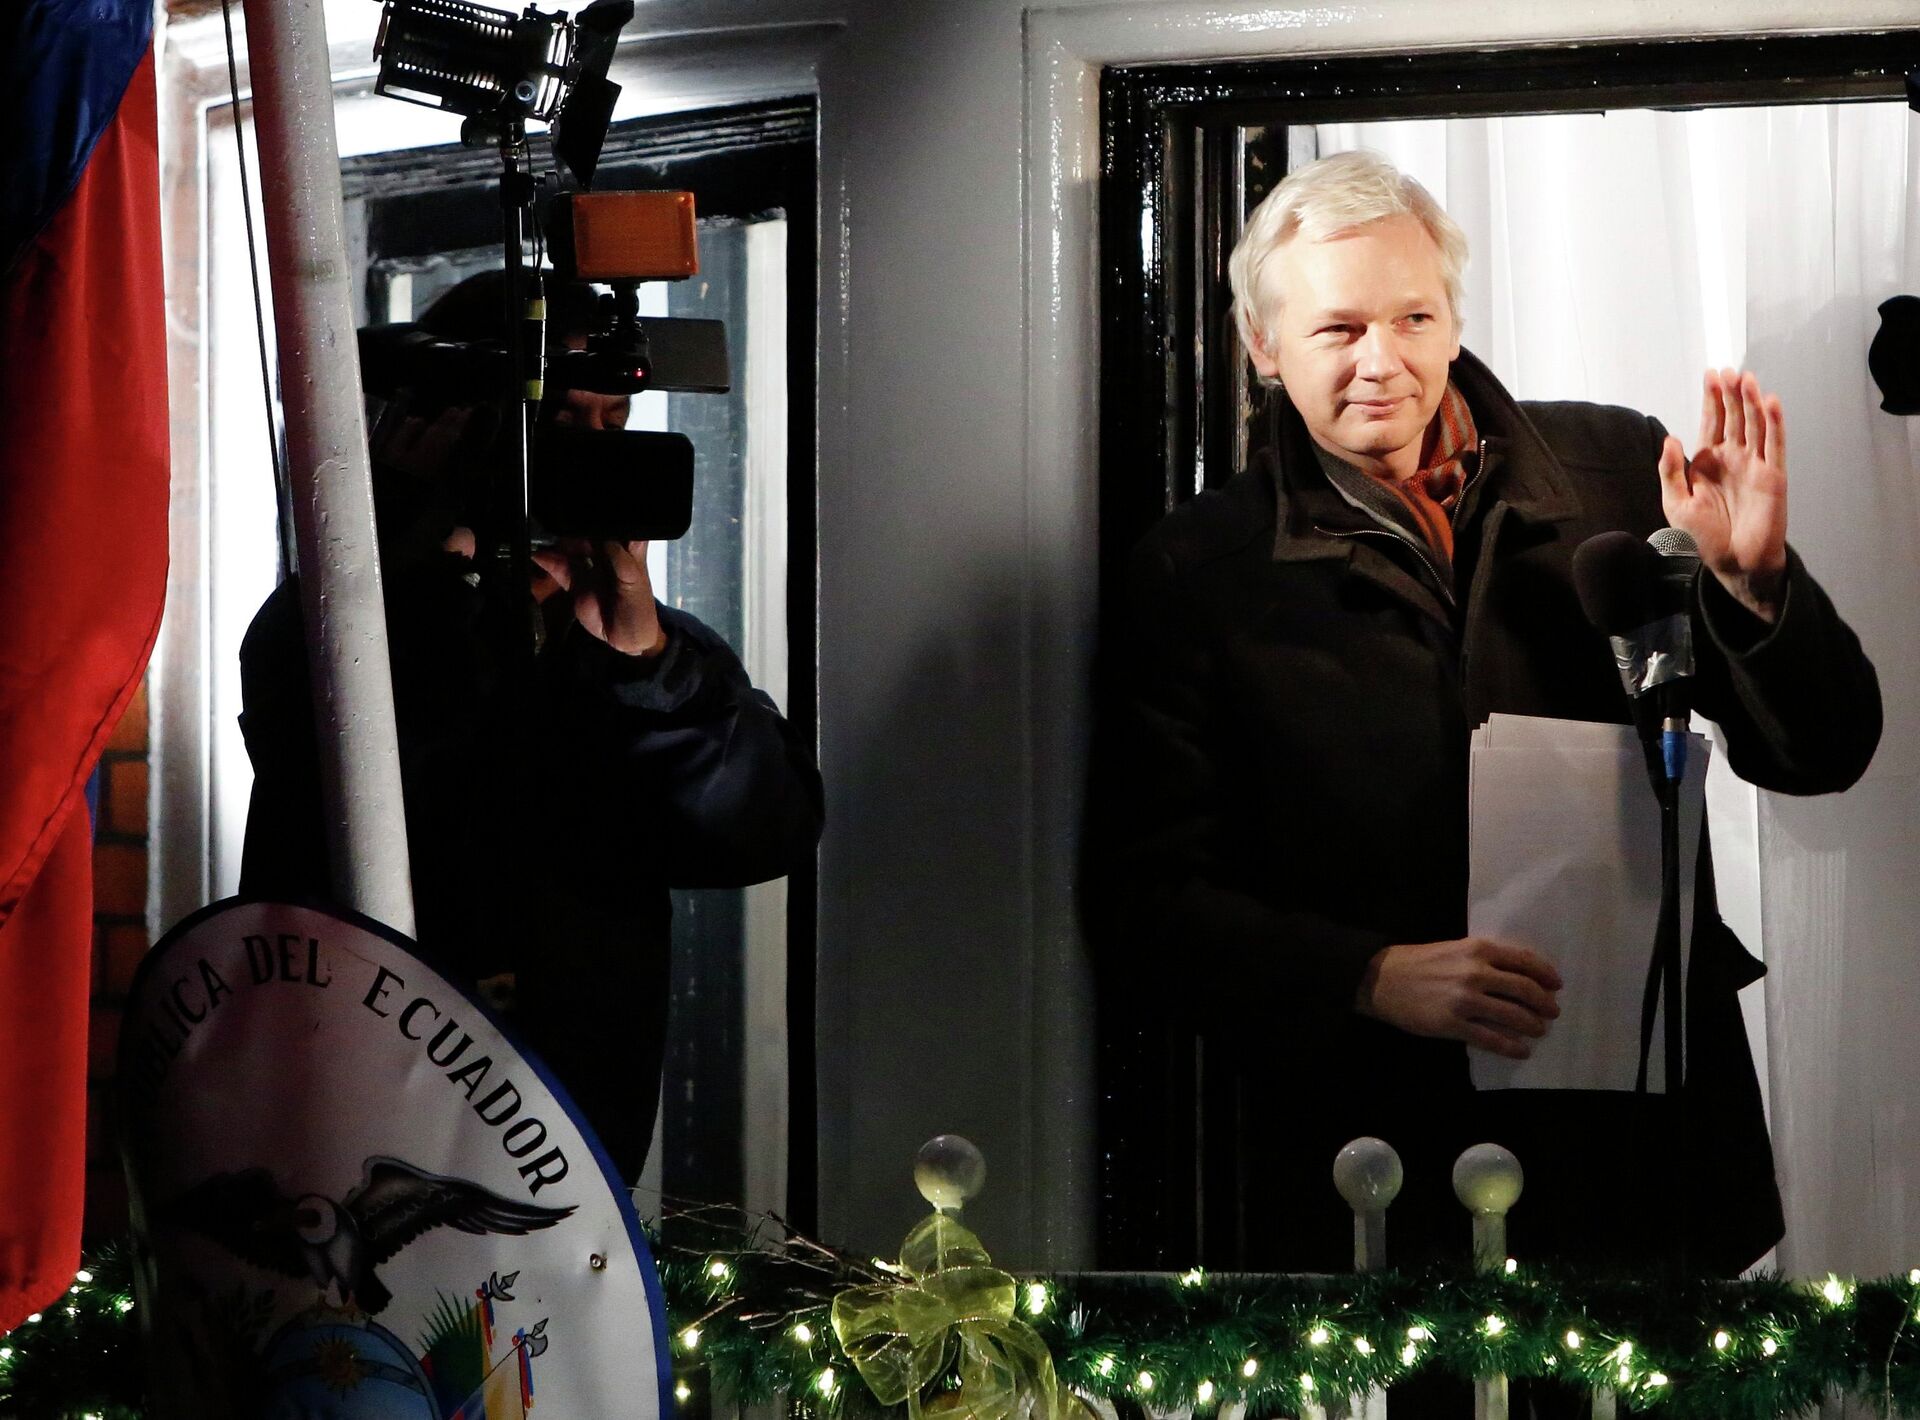 WikiLeaks founder Julian Assange gestures from the balcony of Ecuador's Embassy as he makes a speech in central London, in this file photograph dated December 20, 2012. - Sputnik International, 1920, 11.12.2021